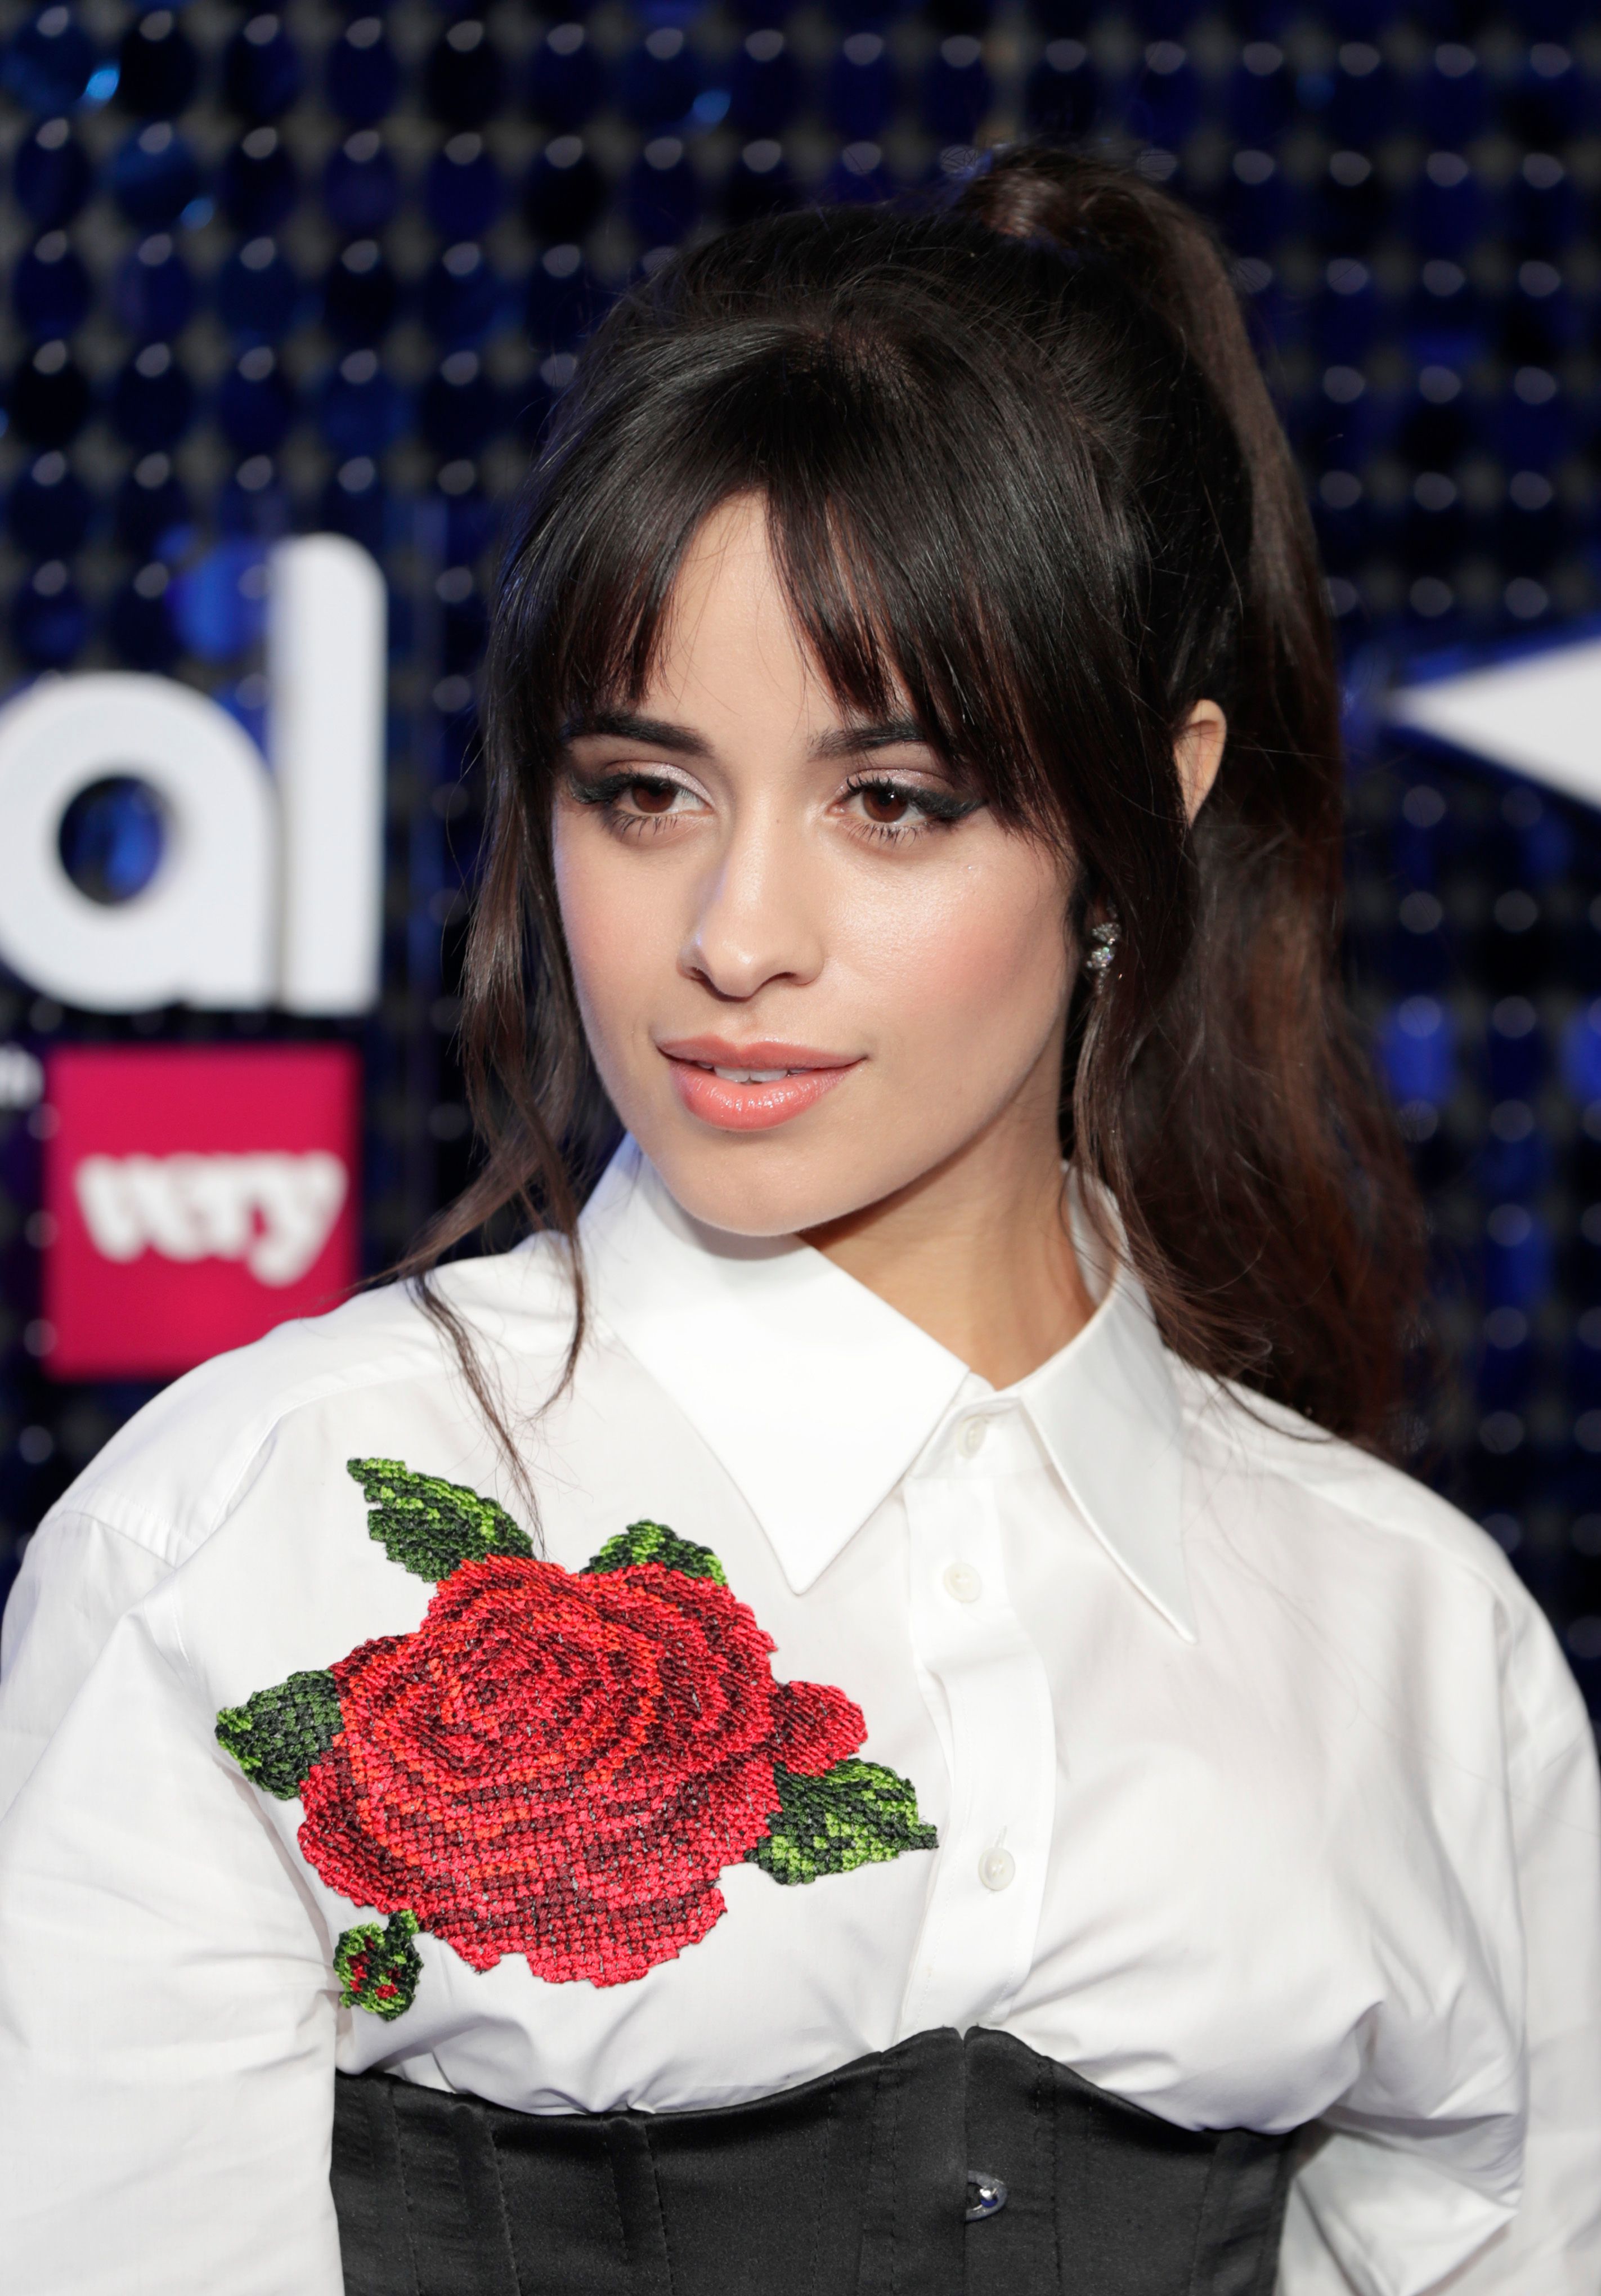 Camila Cabello wears a white button up with black corset and red rose.